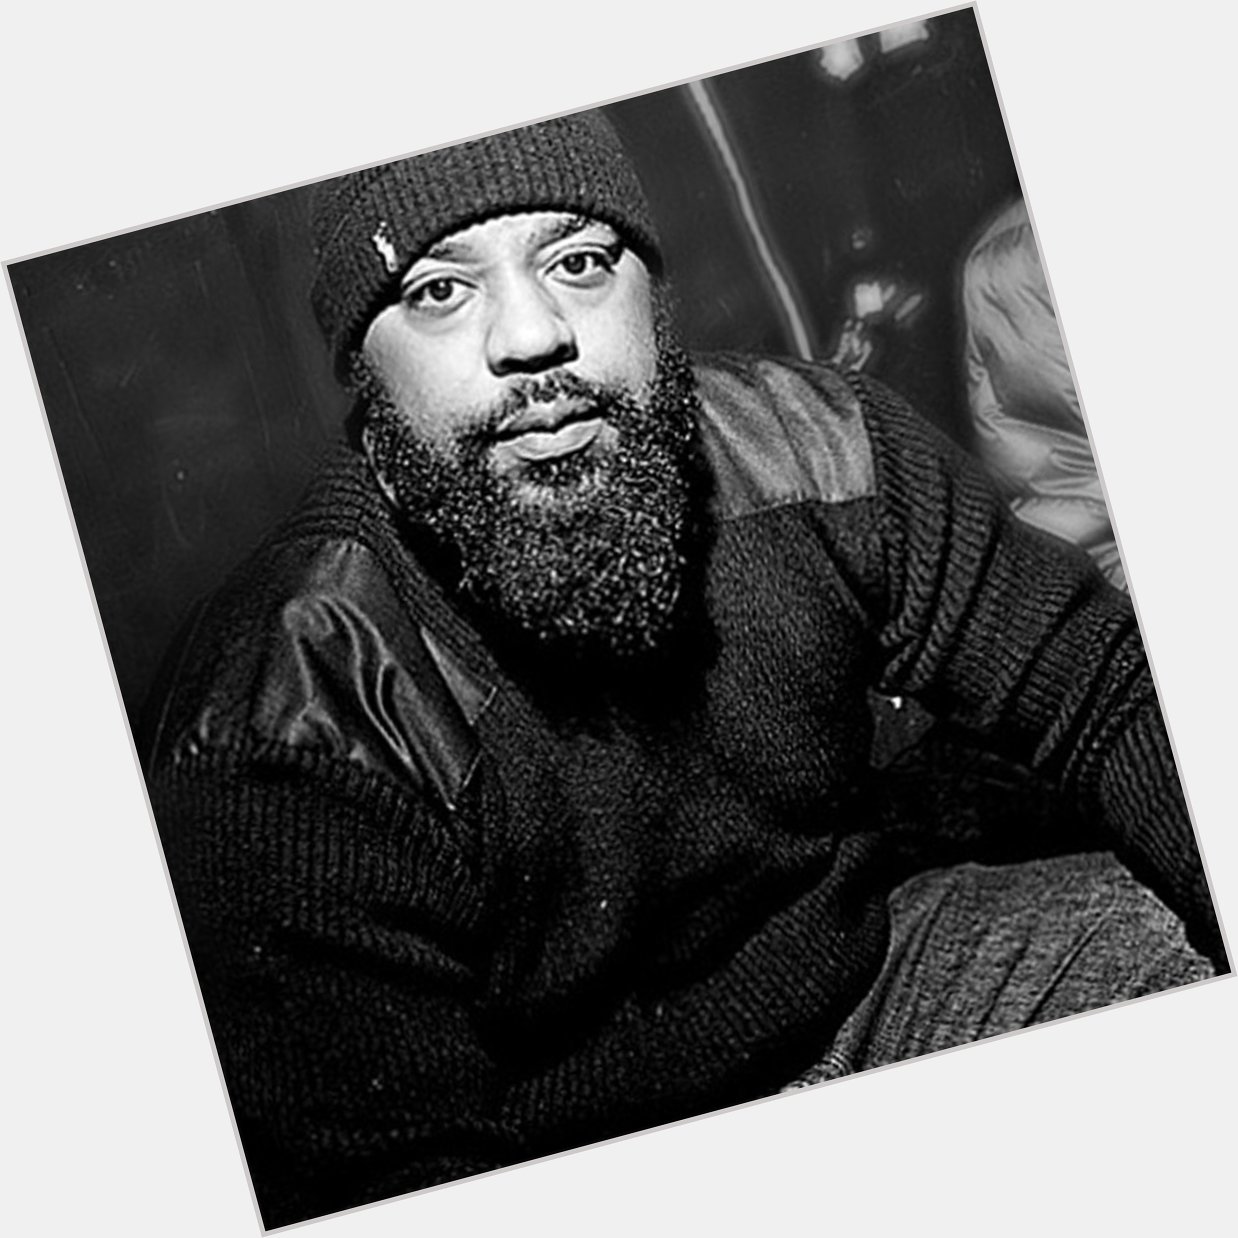 Rest In Rhyme 
Sean Price and Happy Birthday 